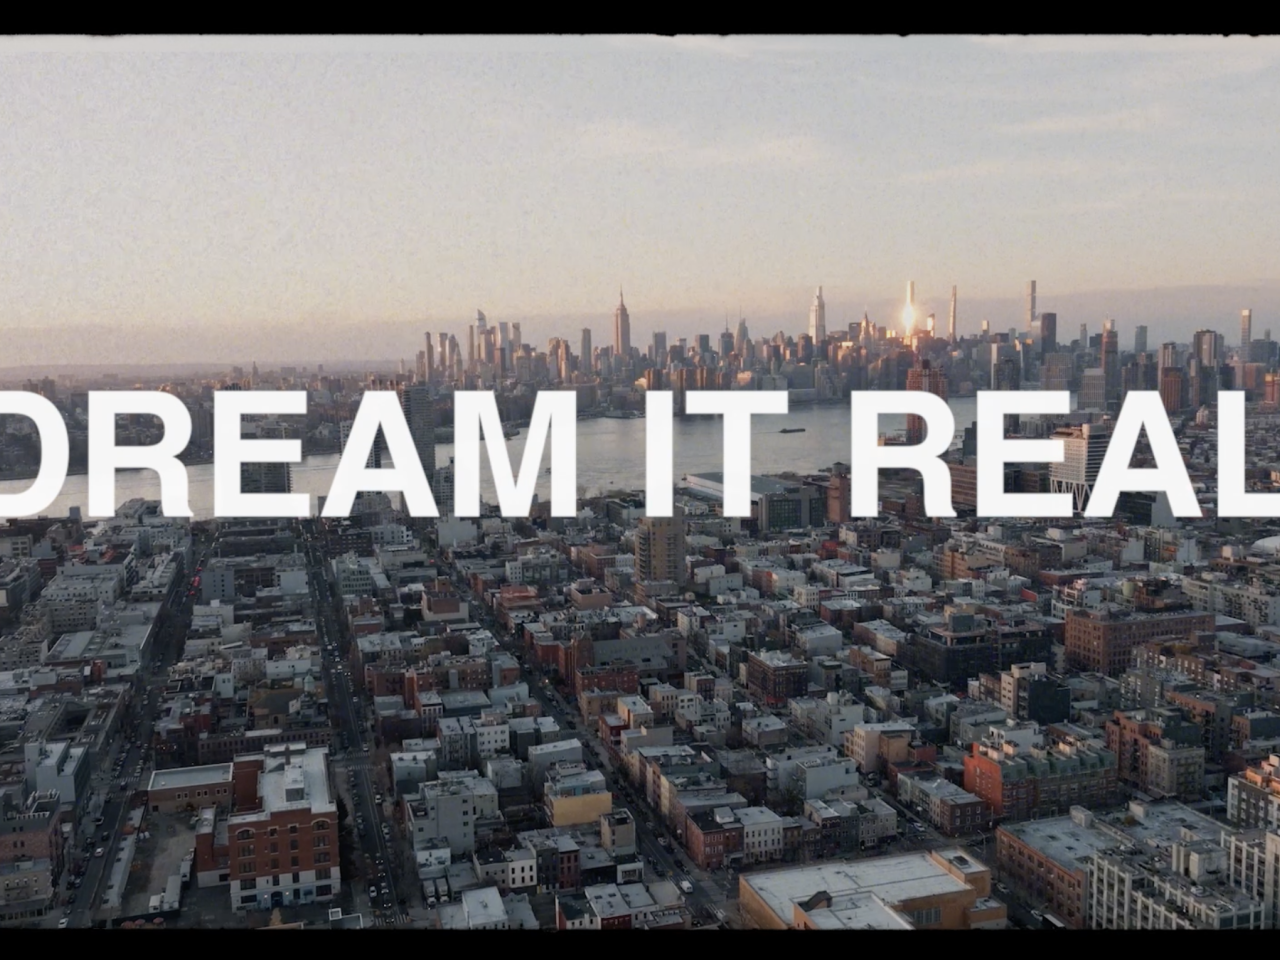 "DREAM IT REAL" over city skyline